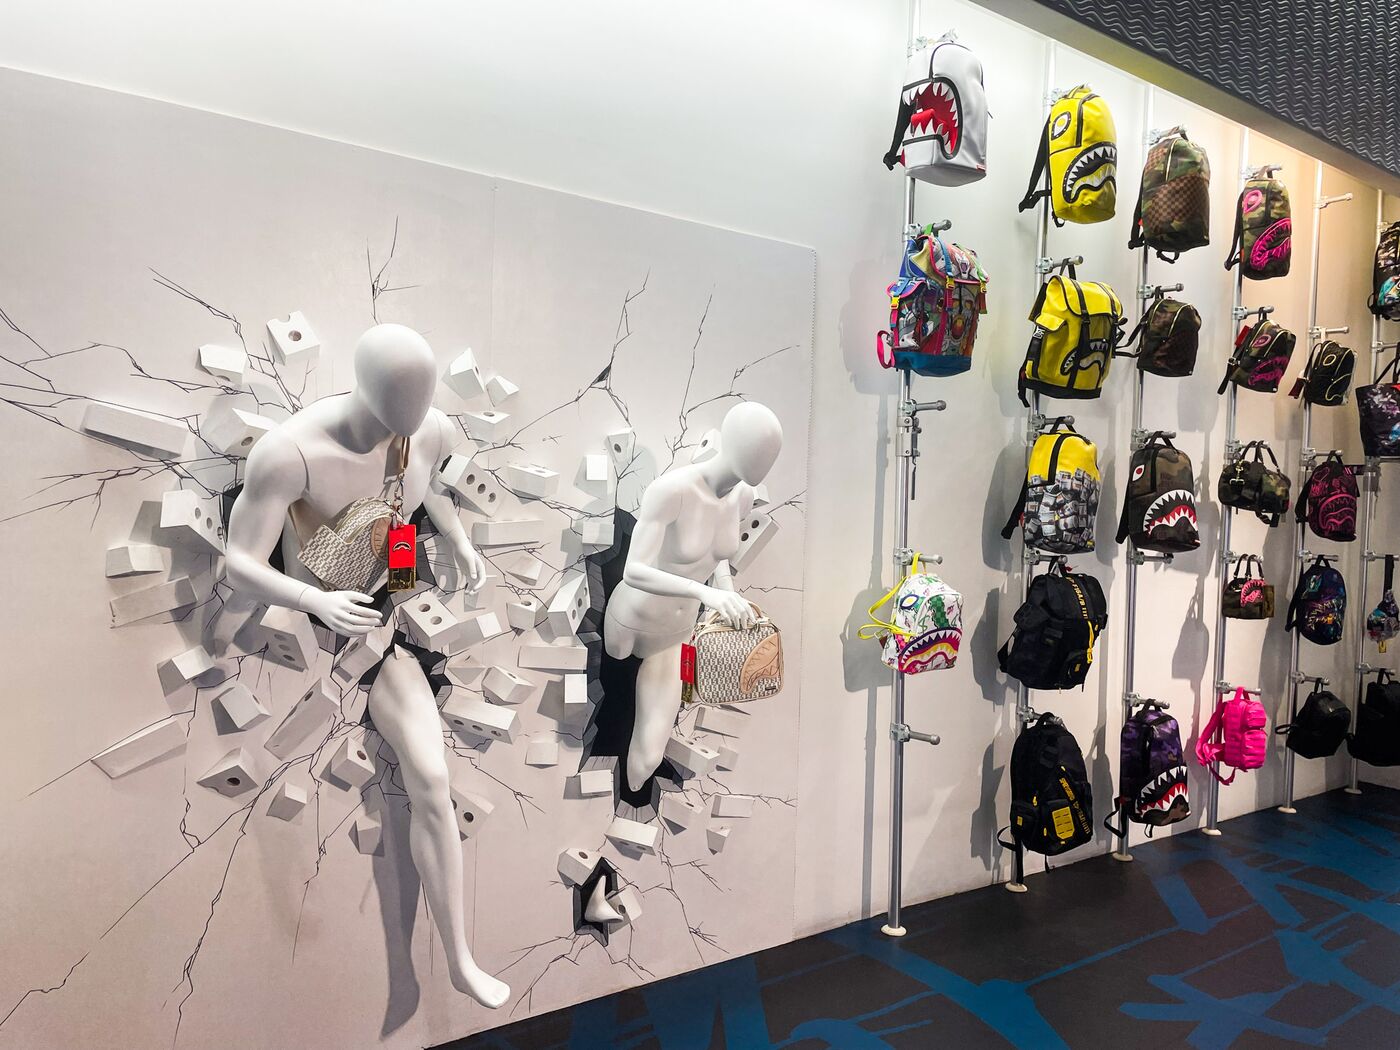 The New York&nbsp;pop-up will remain&nbsp;open in the middle of Times Square until&nbsp;Sept. 5.